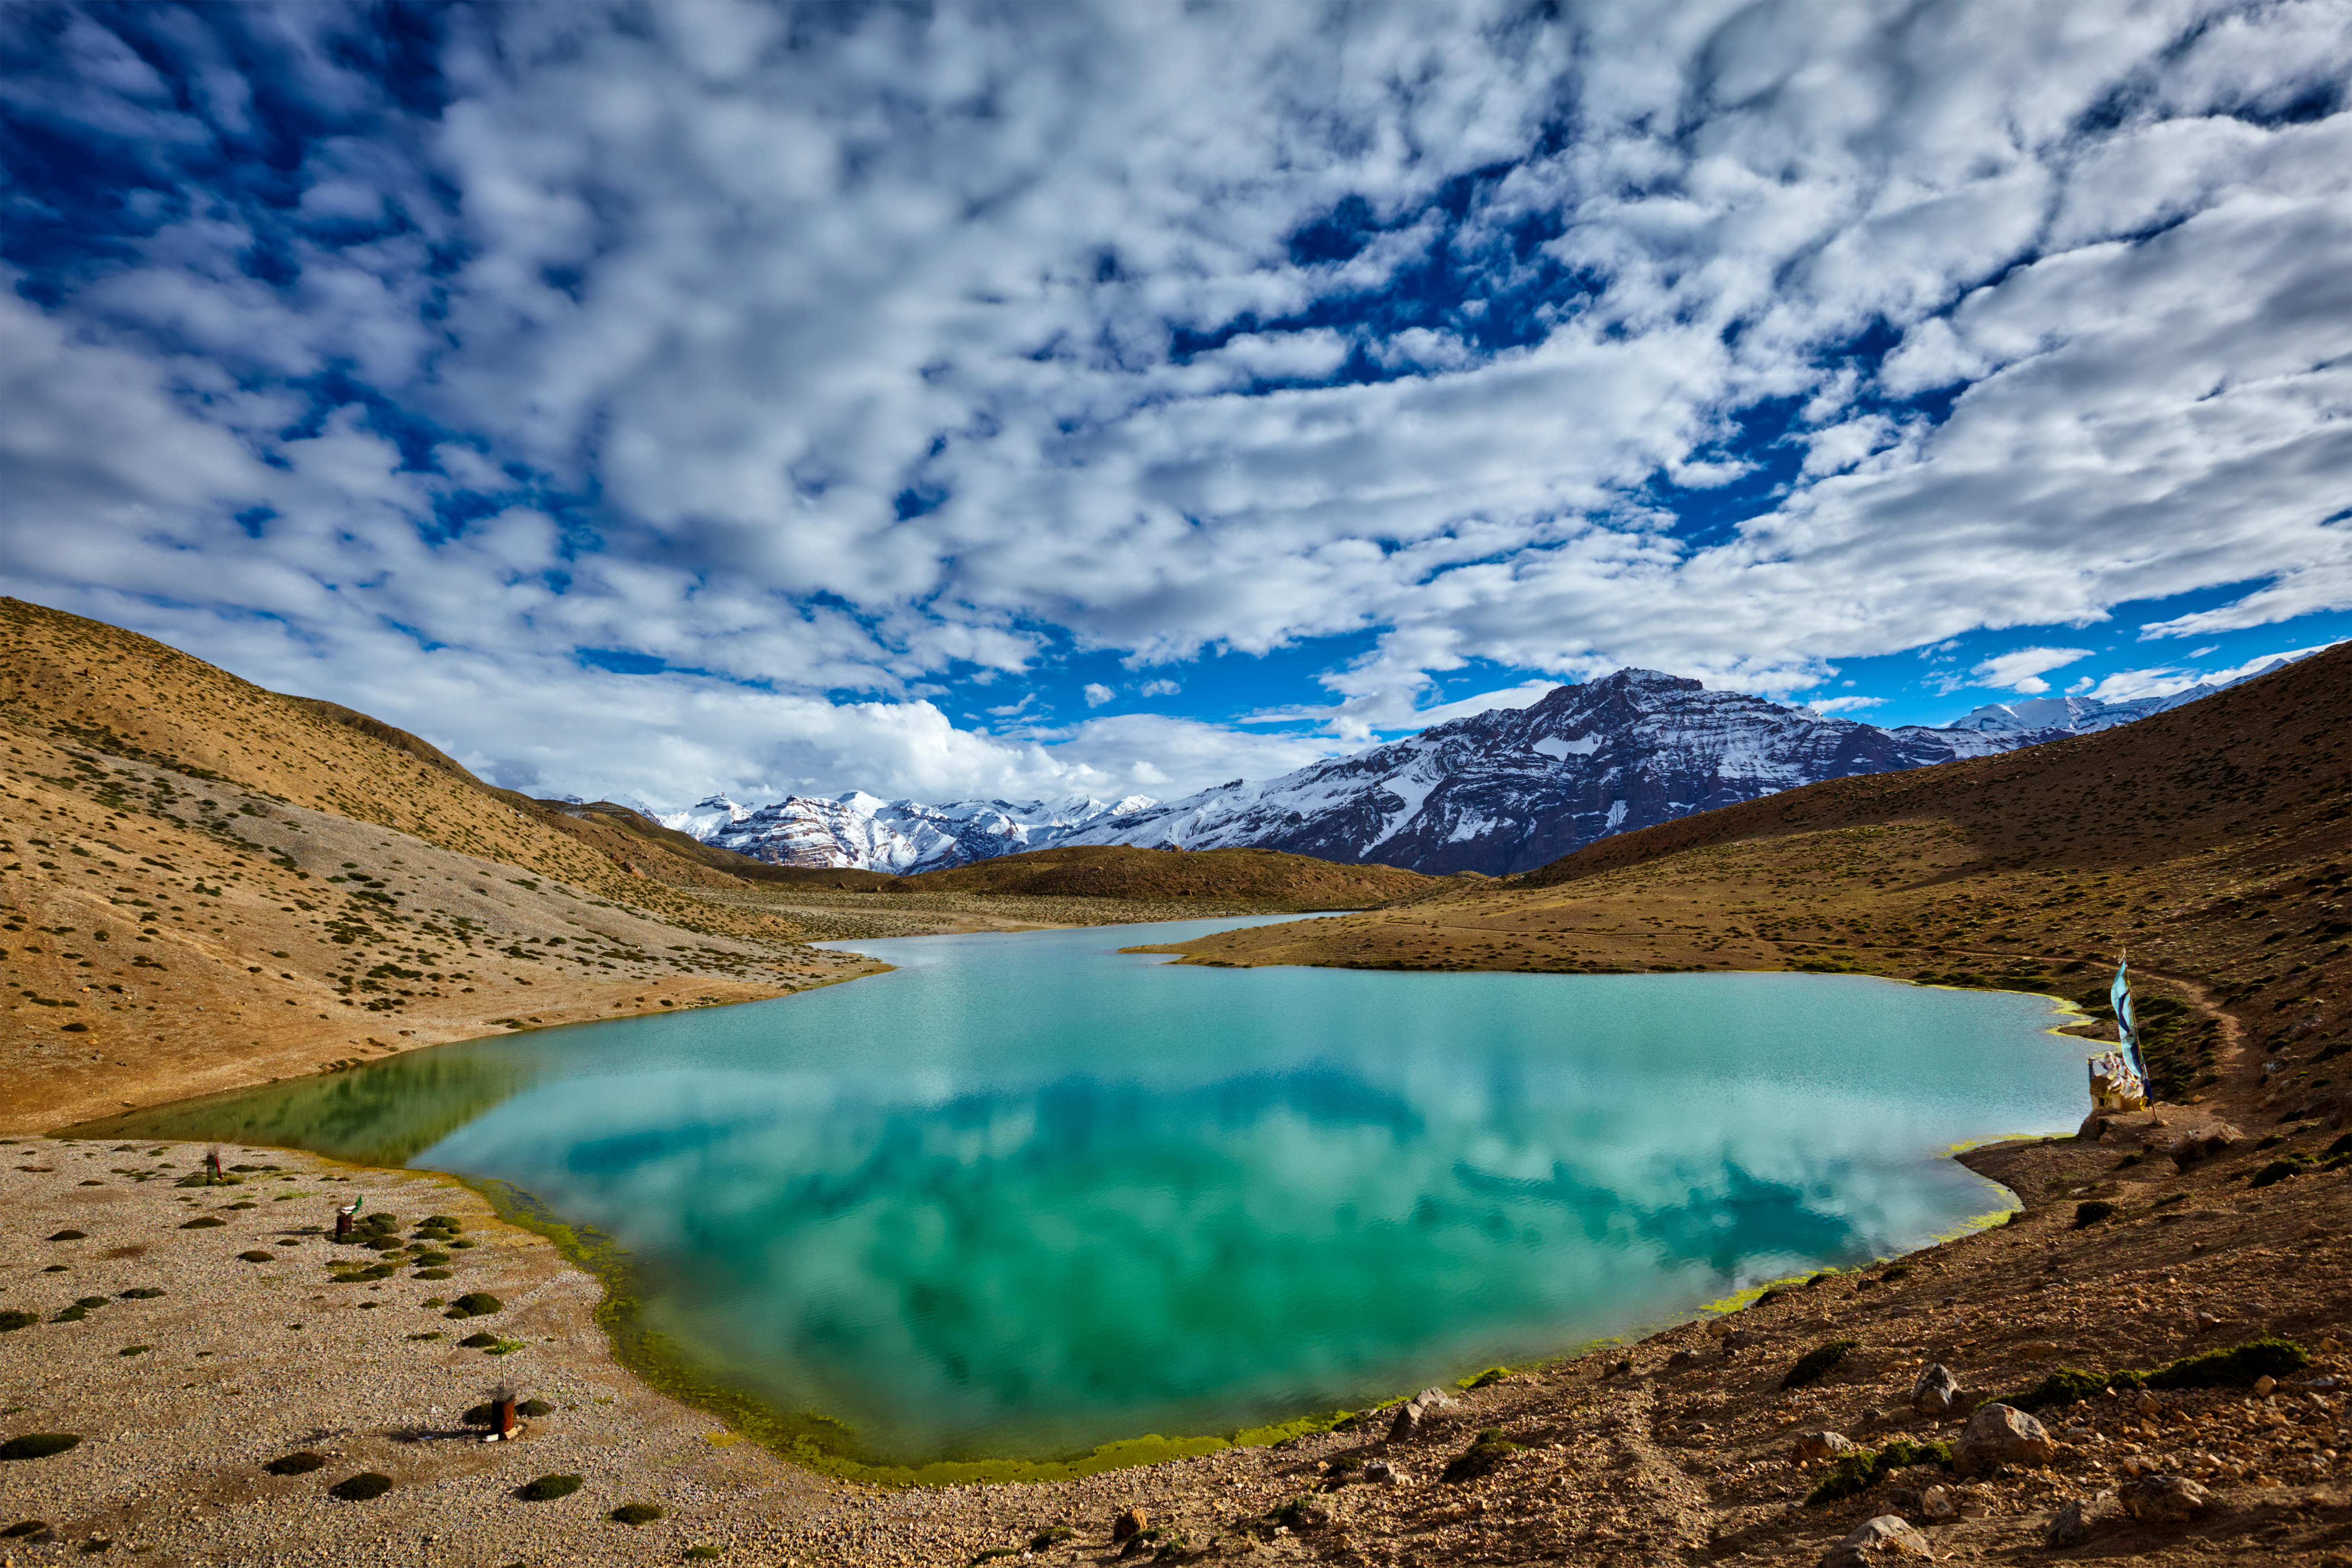 Spiti Valley Packages from Hyderabad | Get Upto 50% Off